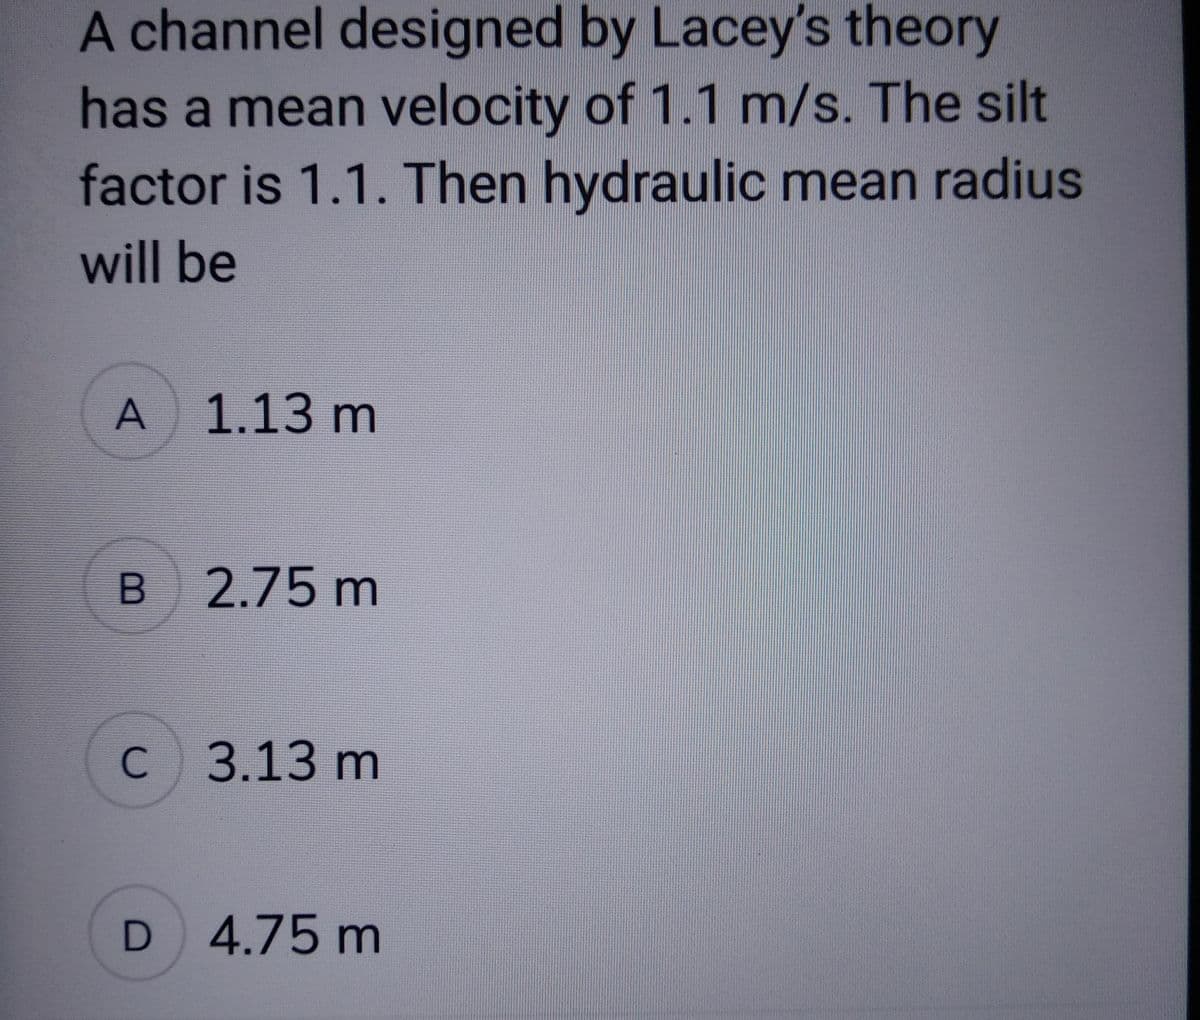 A channel designed by Lacey's theory
has a mean velocity of 1.1 m/s. The silt
factor is 1.1. Then hydraulic mean radius
will be
A
B
1.13 m
2.75 m
C 3.13 m
D 4.75 m